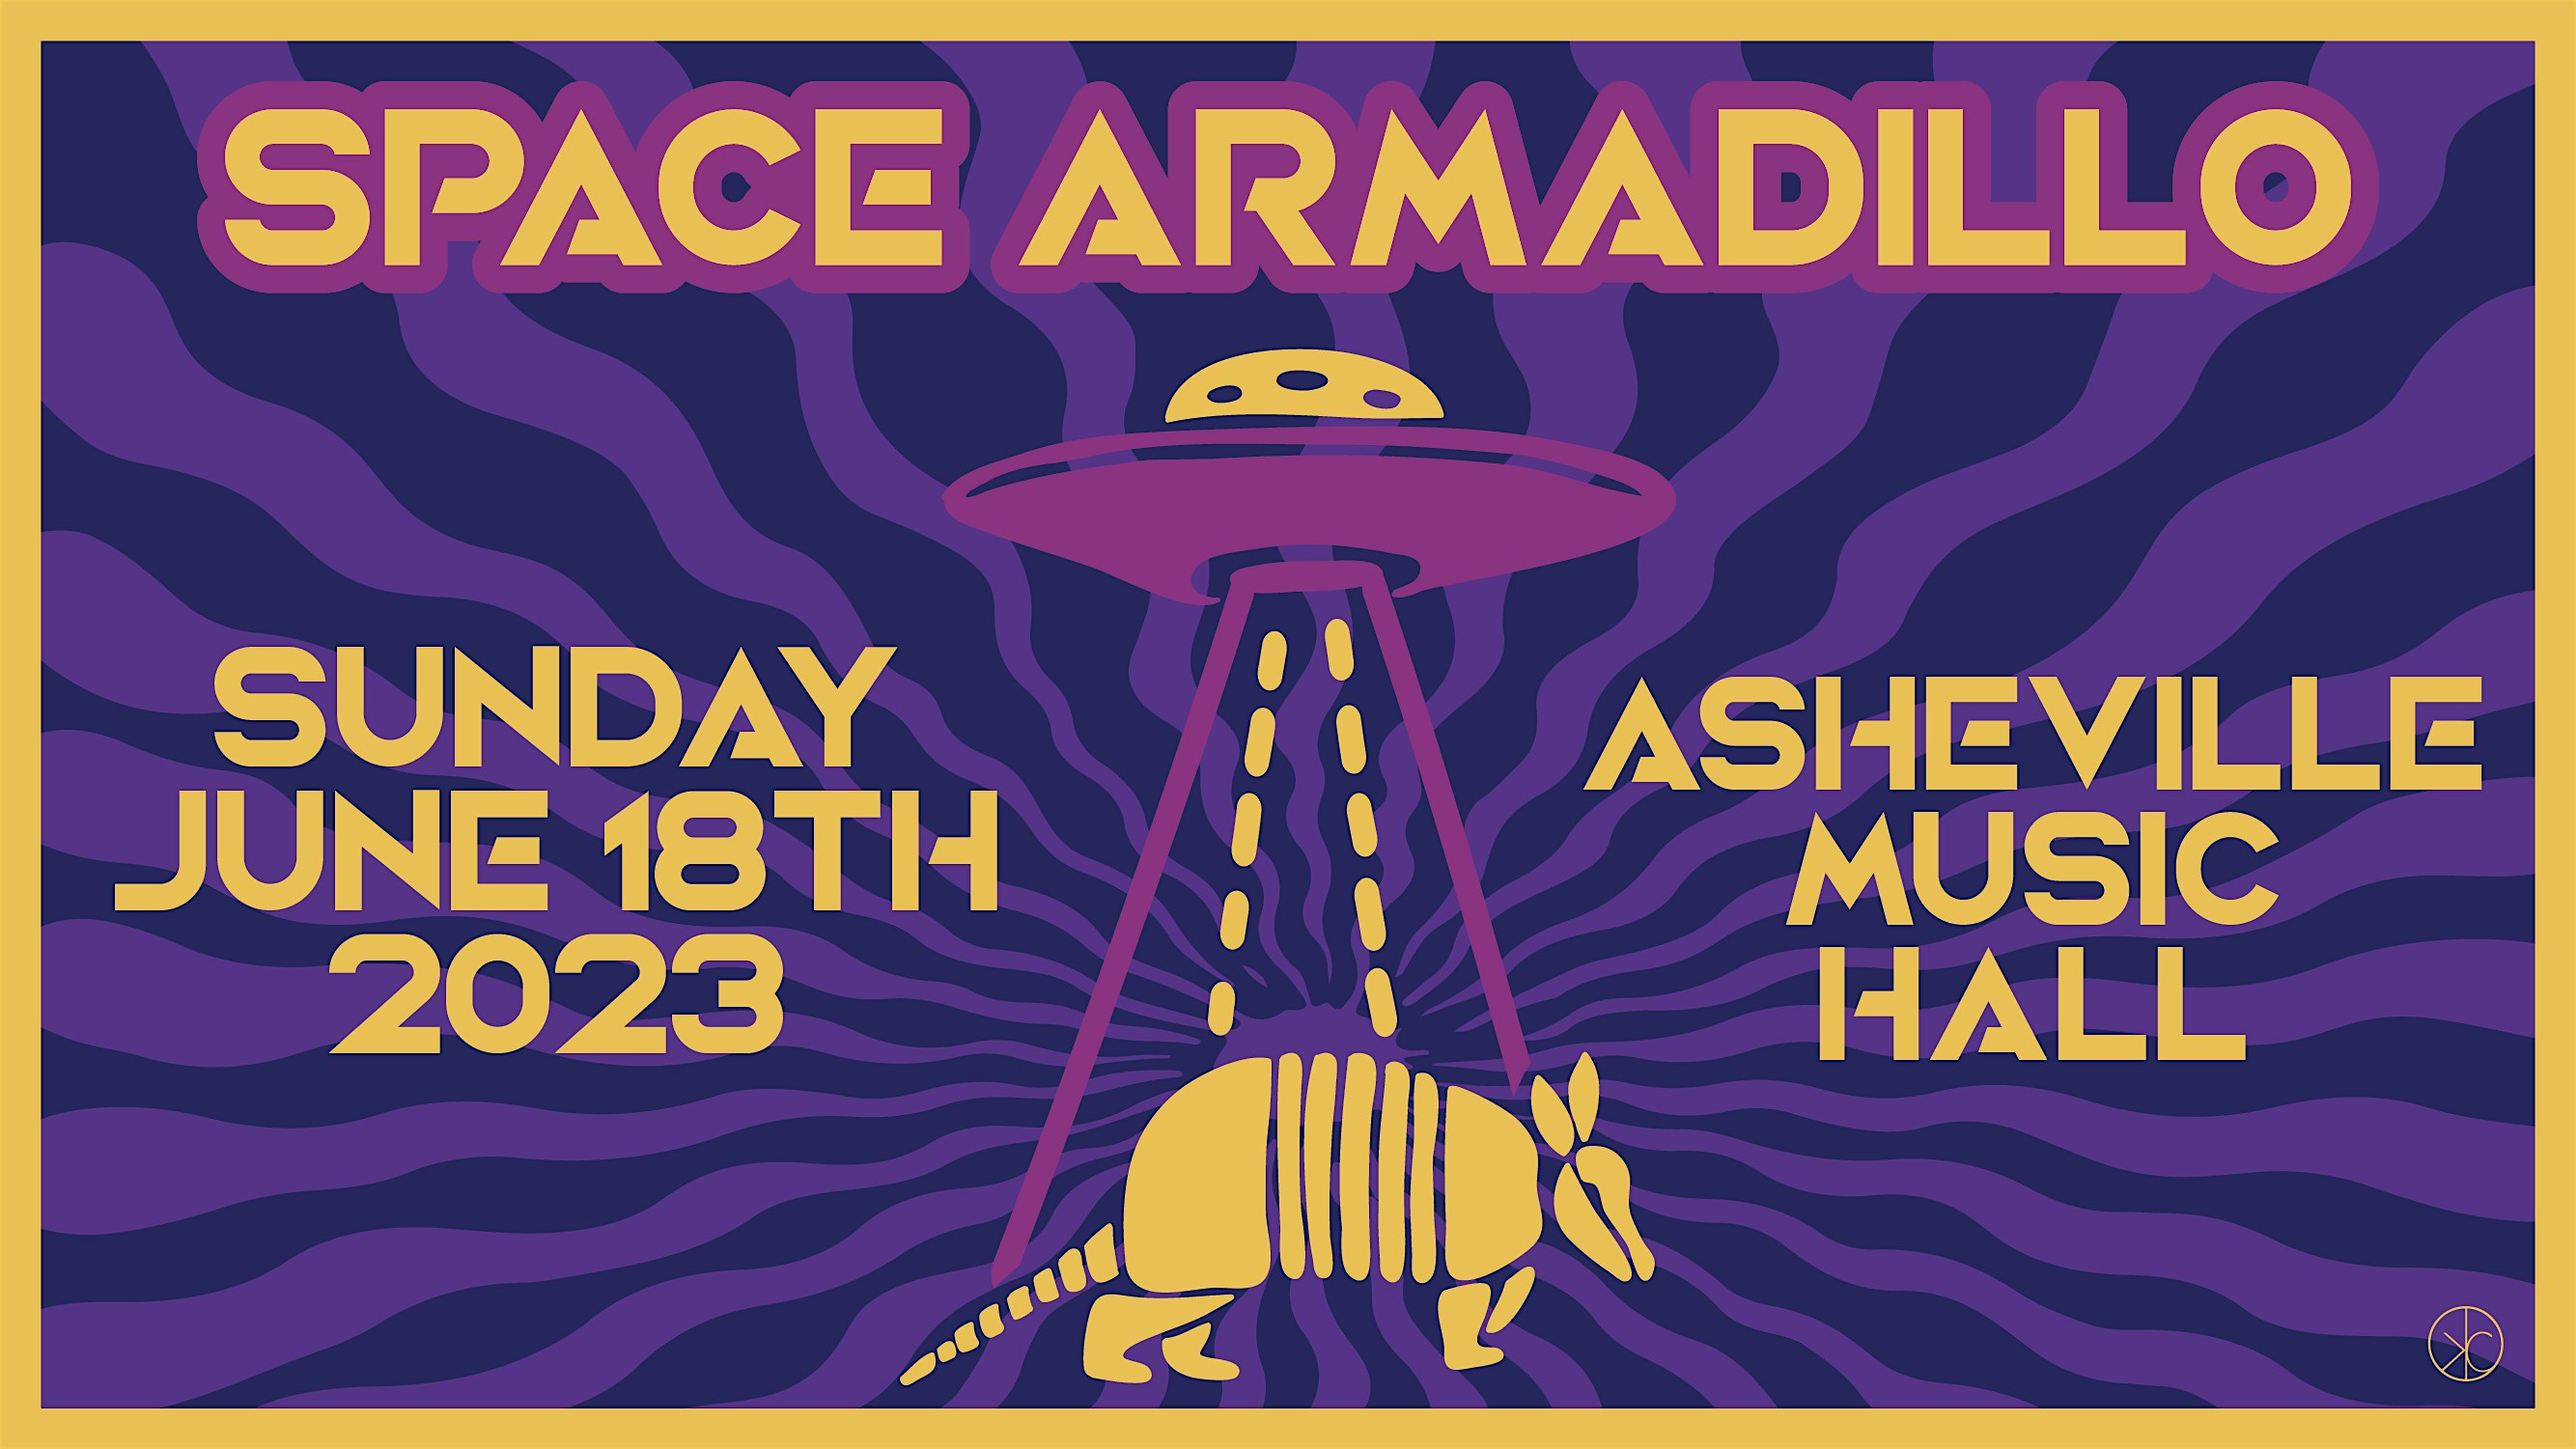 Space Armadillo at Asheville Music Hall